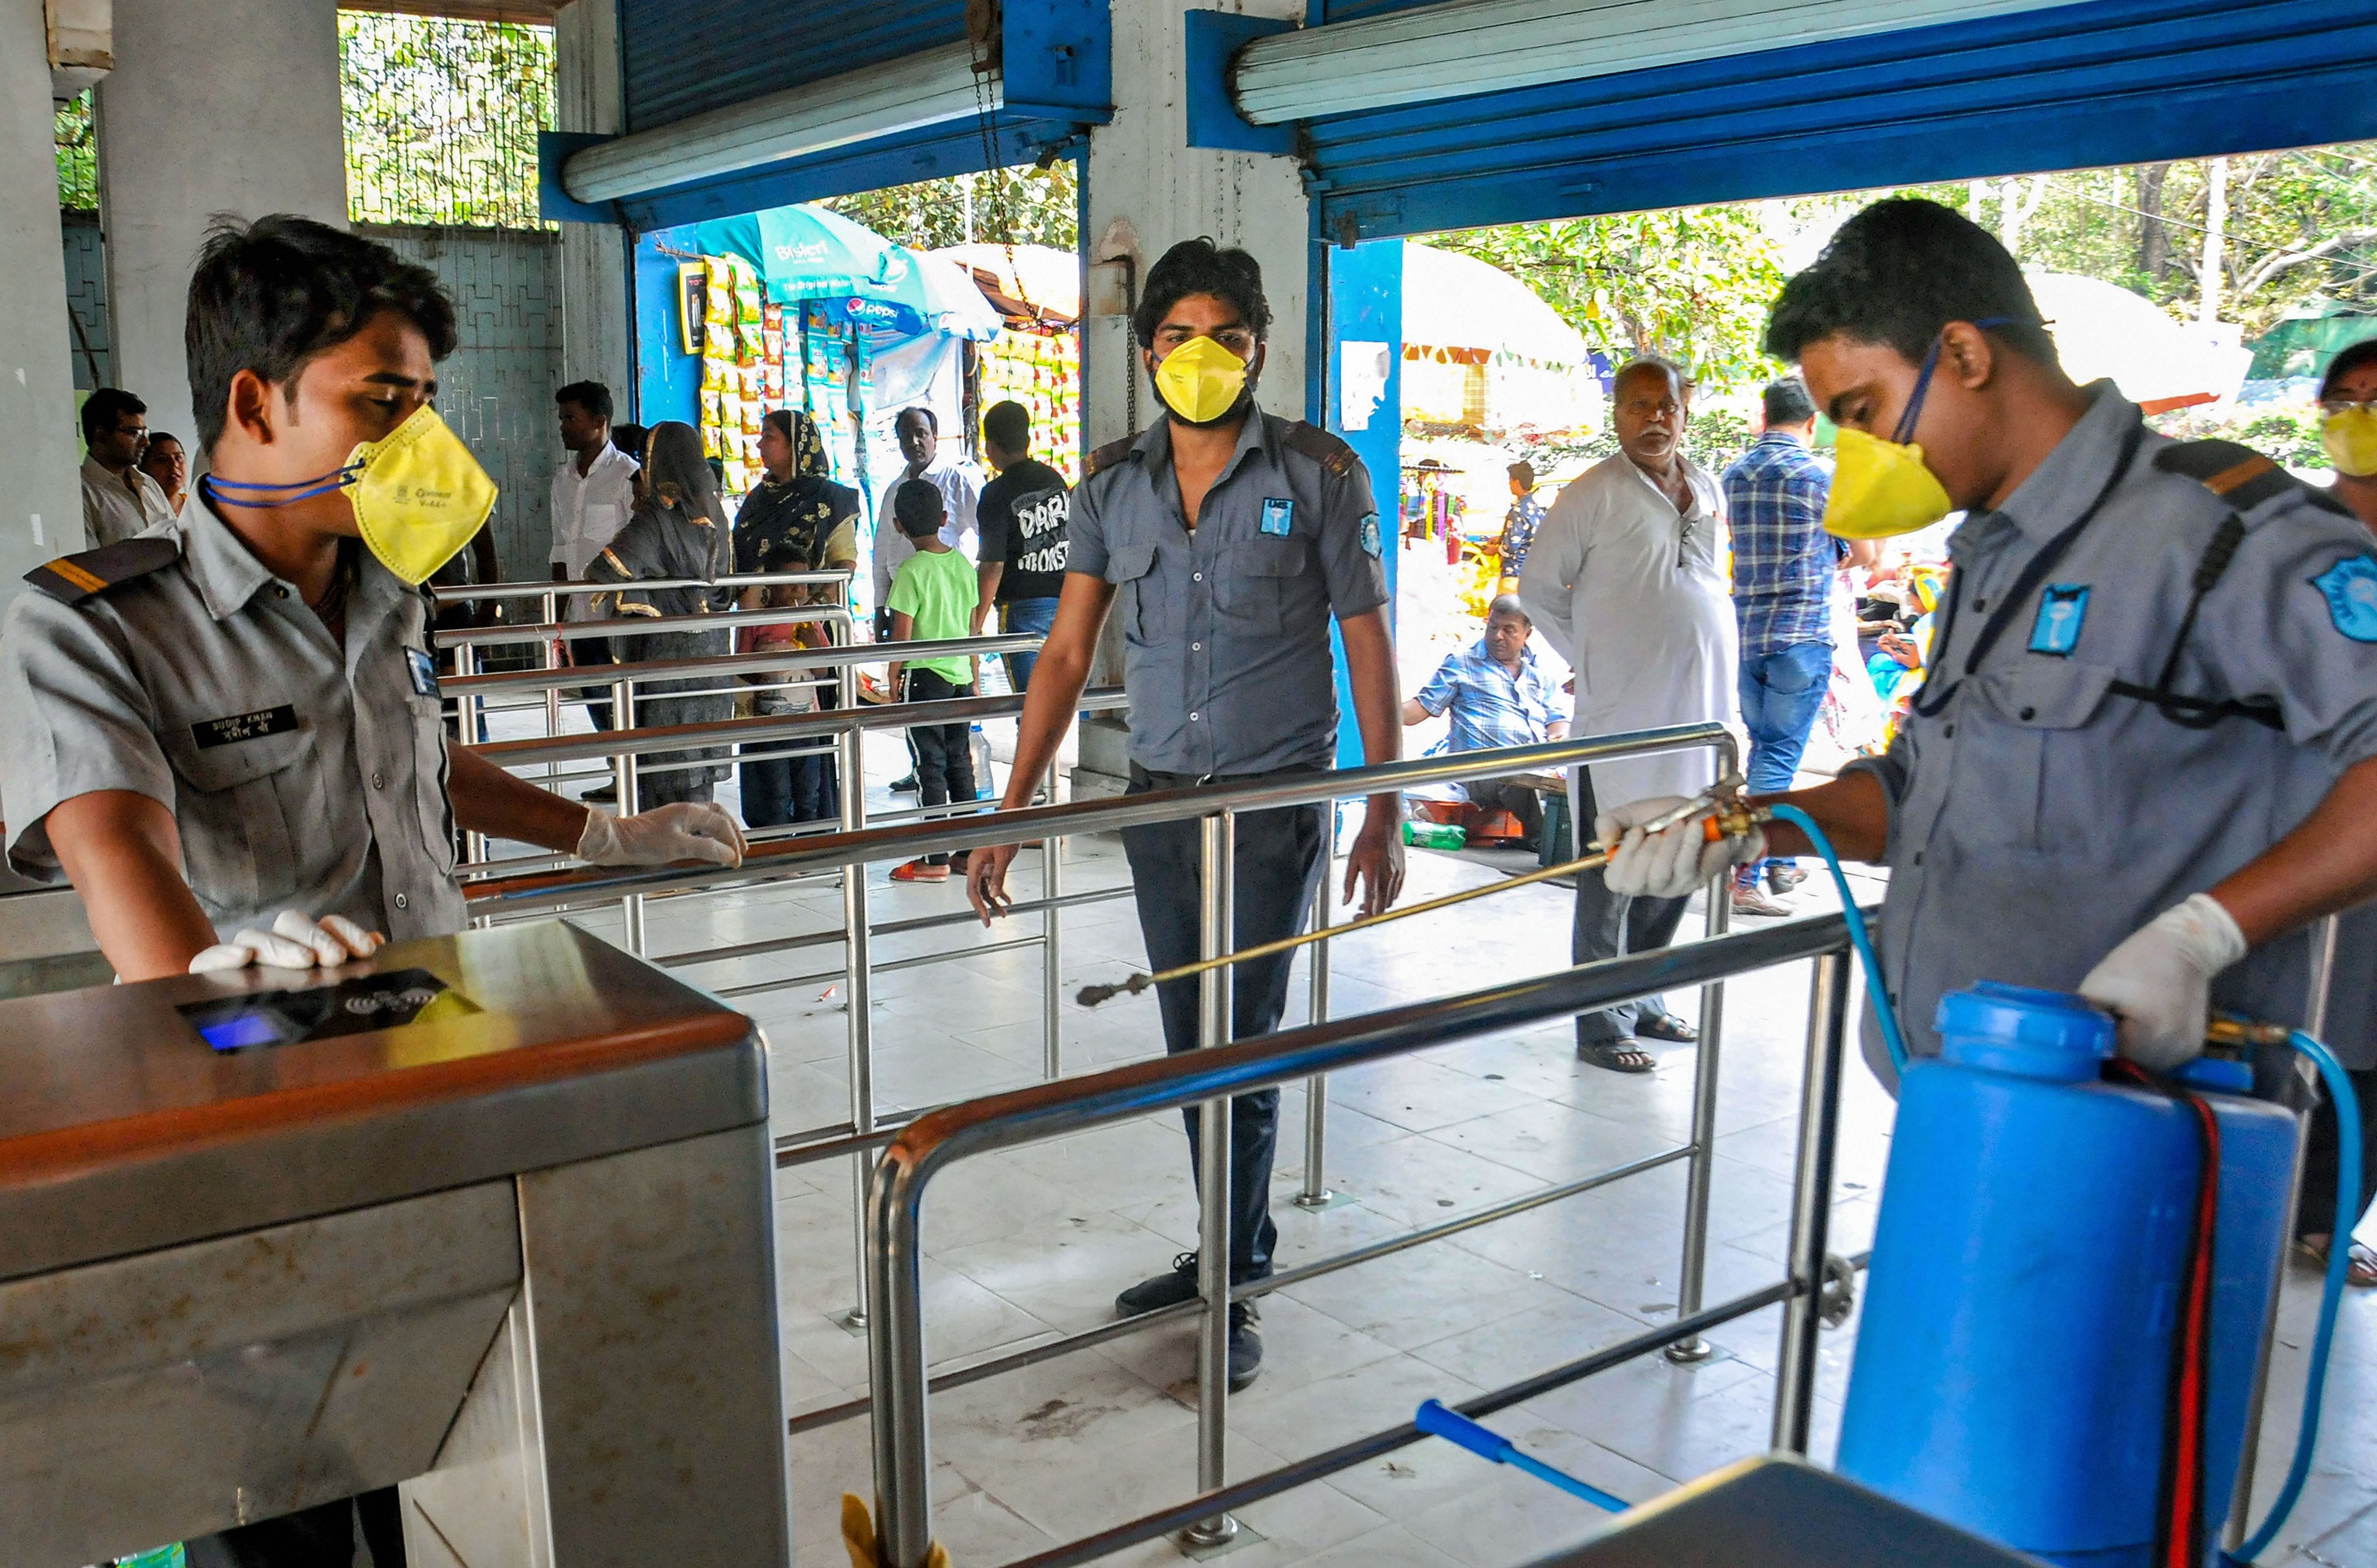 Kolkata: Cleaning staff members spray disinfectant on railings in the wake of deadly coronavirus, at the entrance gate of Alipore Zoological Garden. (Credit: PTI)